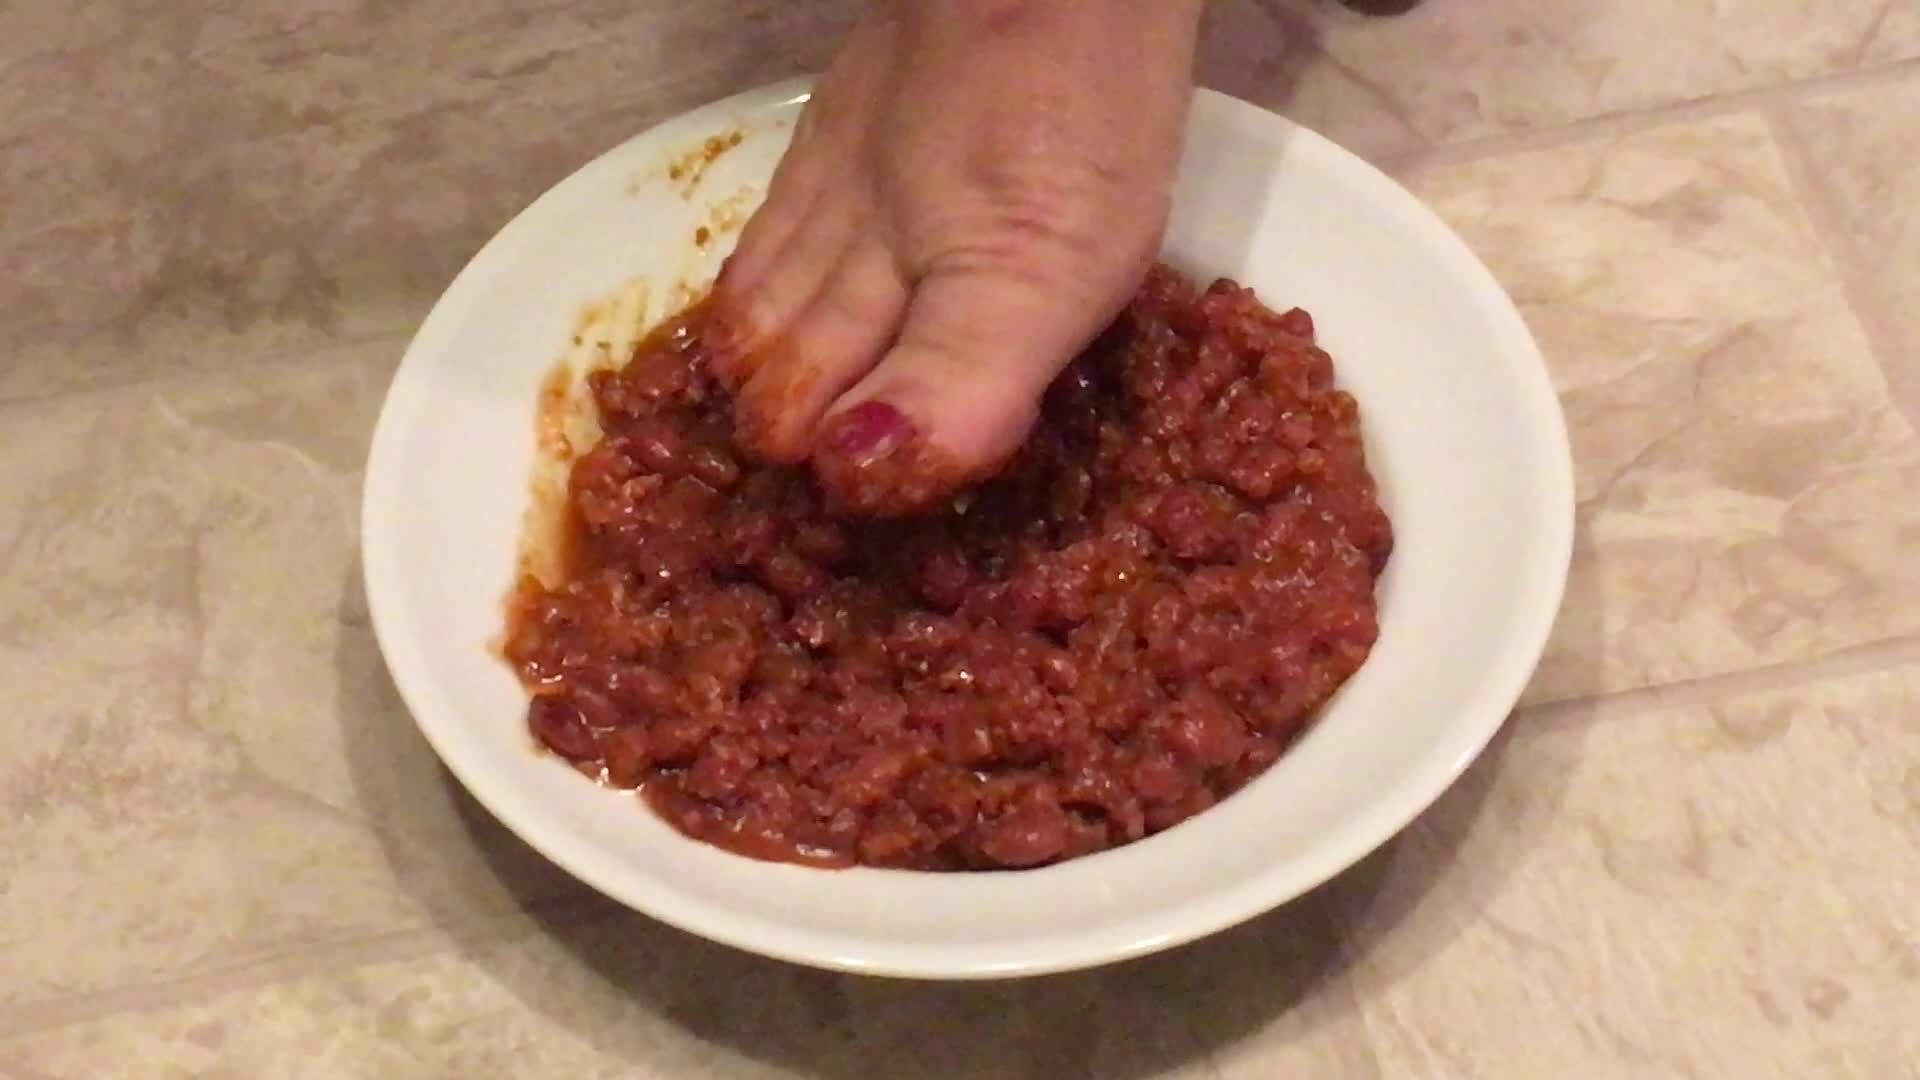 Feet in Chili